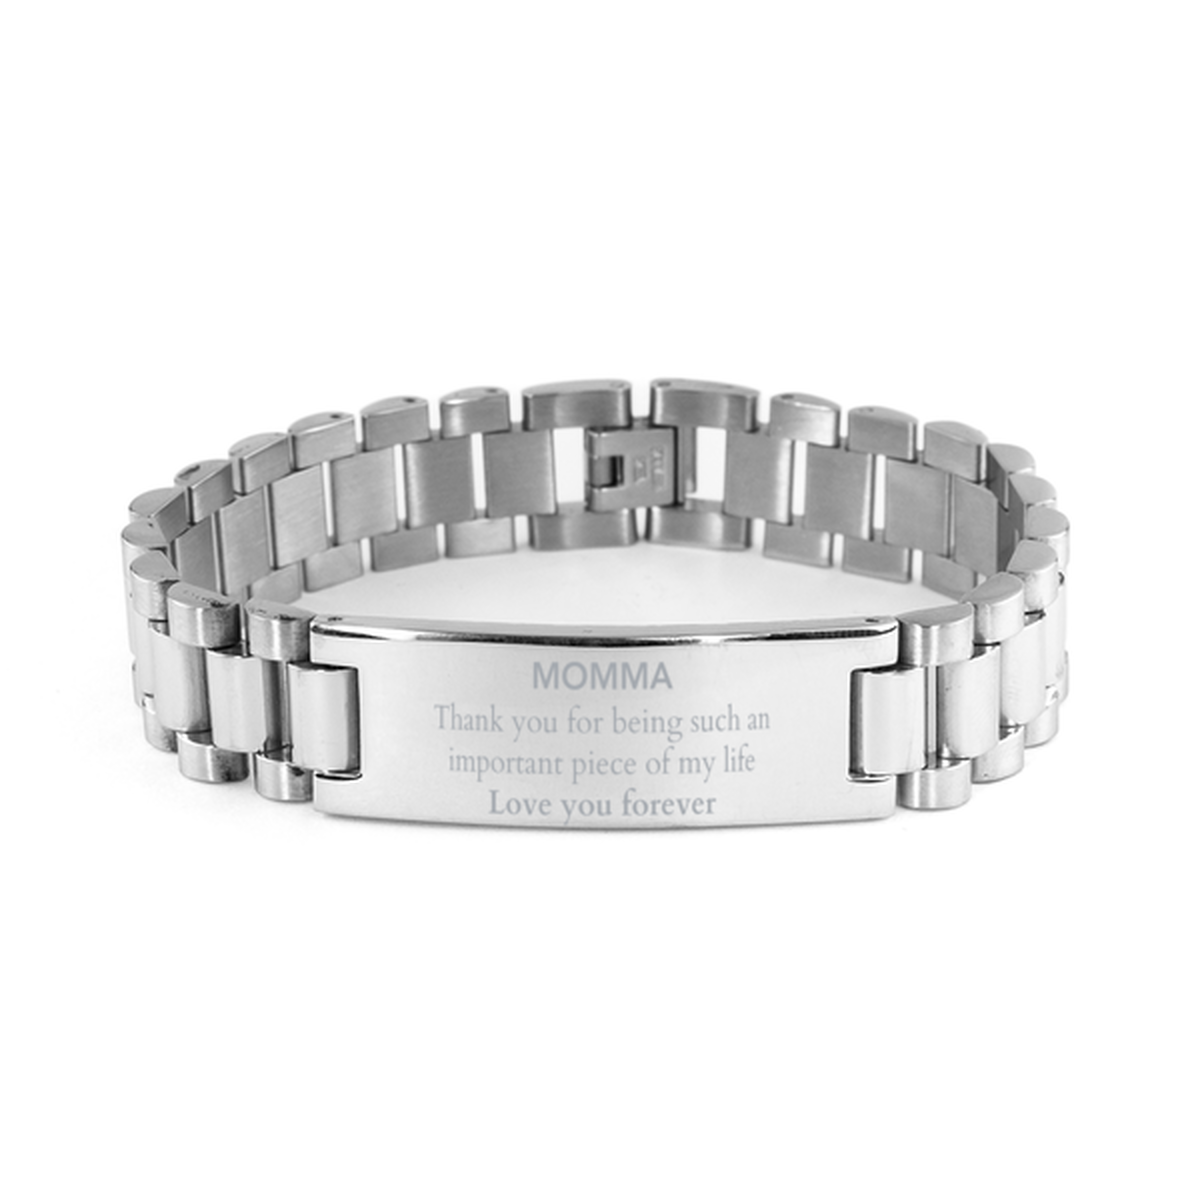 Appropriate Momma Ladder Stainless Steel Bracelet Epic Birthday Gifts for Momma Thank you for being such an important piece of my life Momma Christmas Mothers Fathers Day